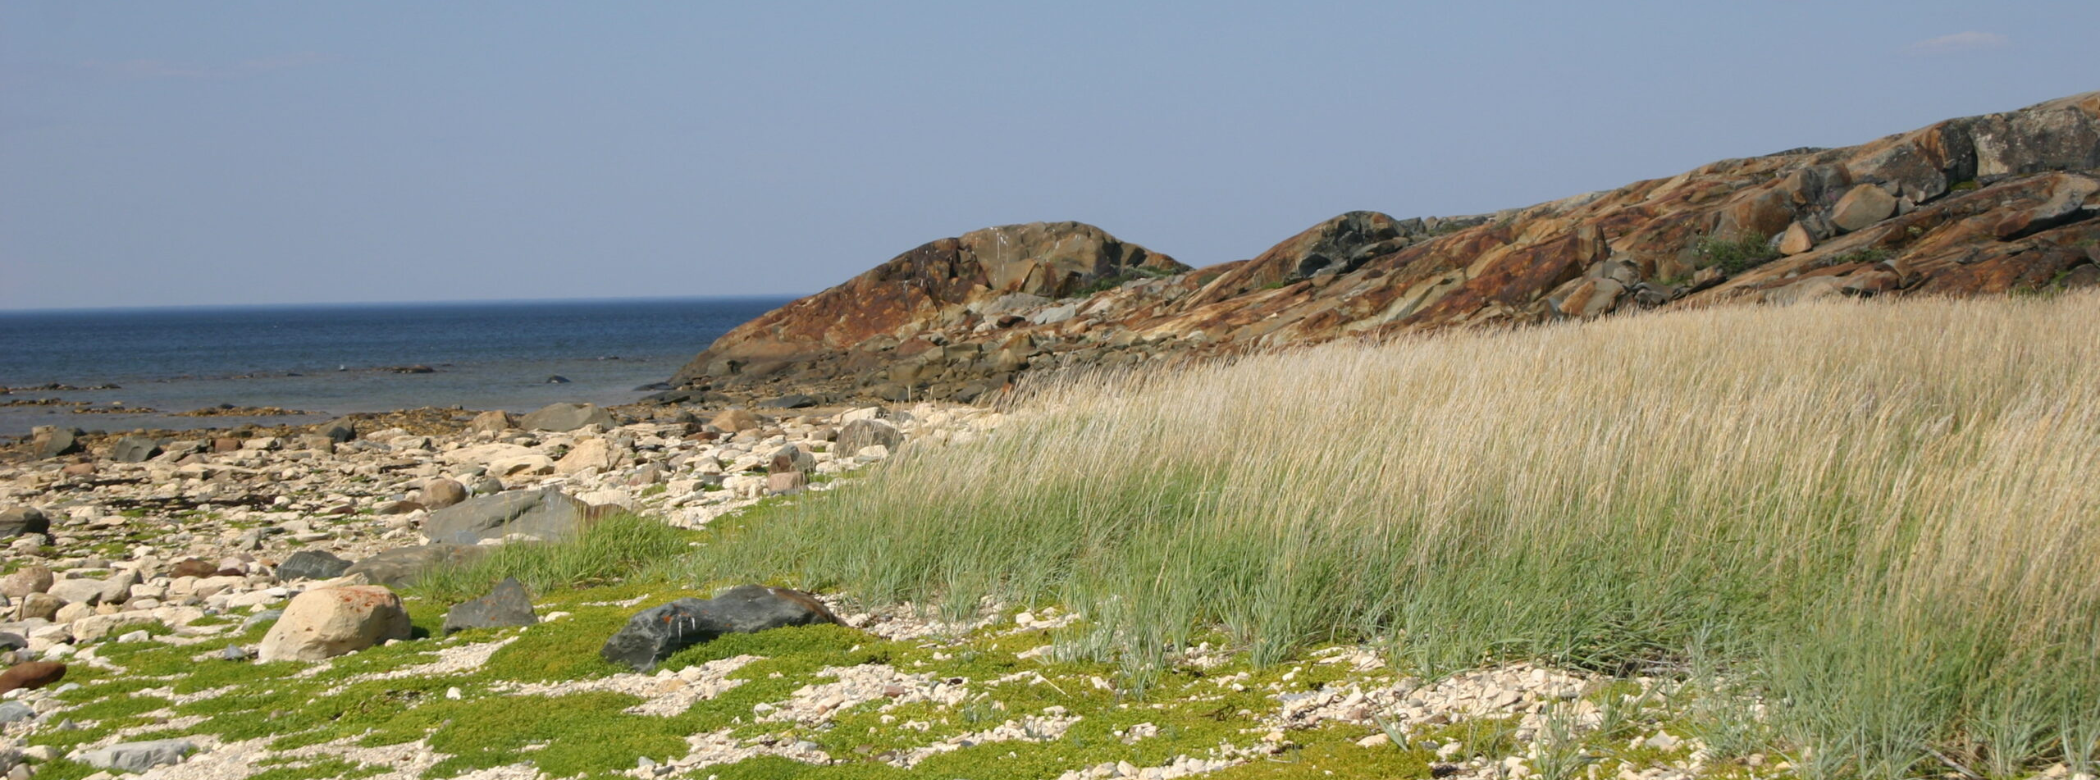 Photograph of a rocky and grassy shoreline with reddish-brown rocks in the background.